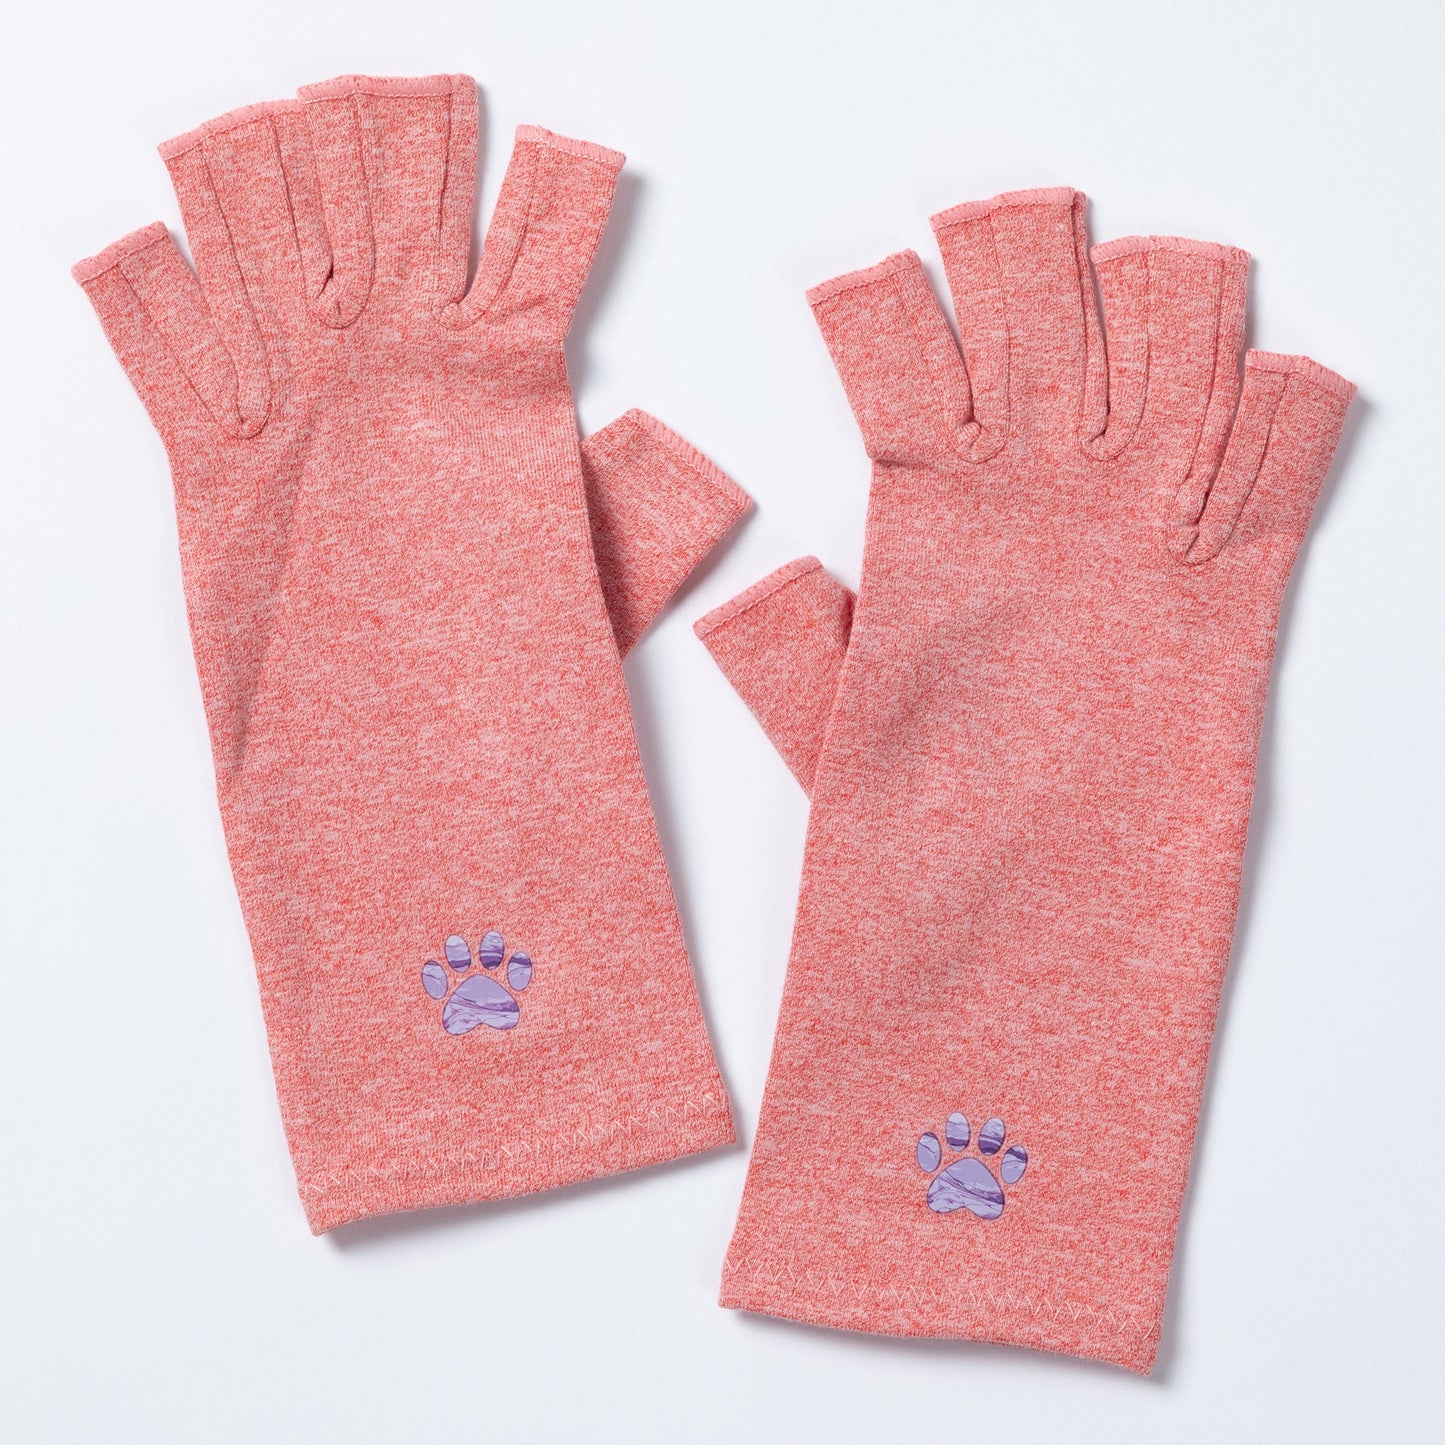 Paw Print Compression Gloves